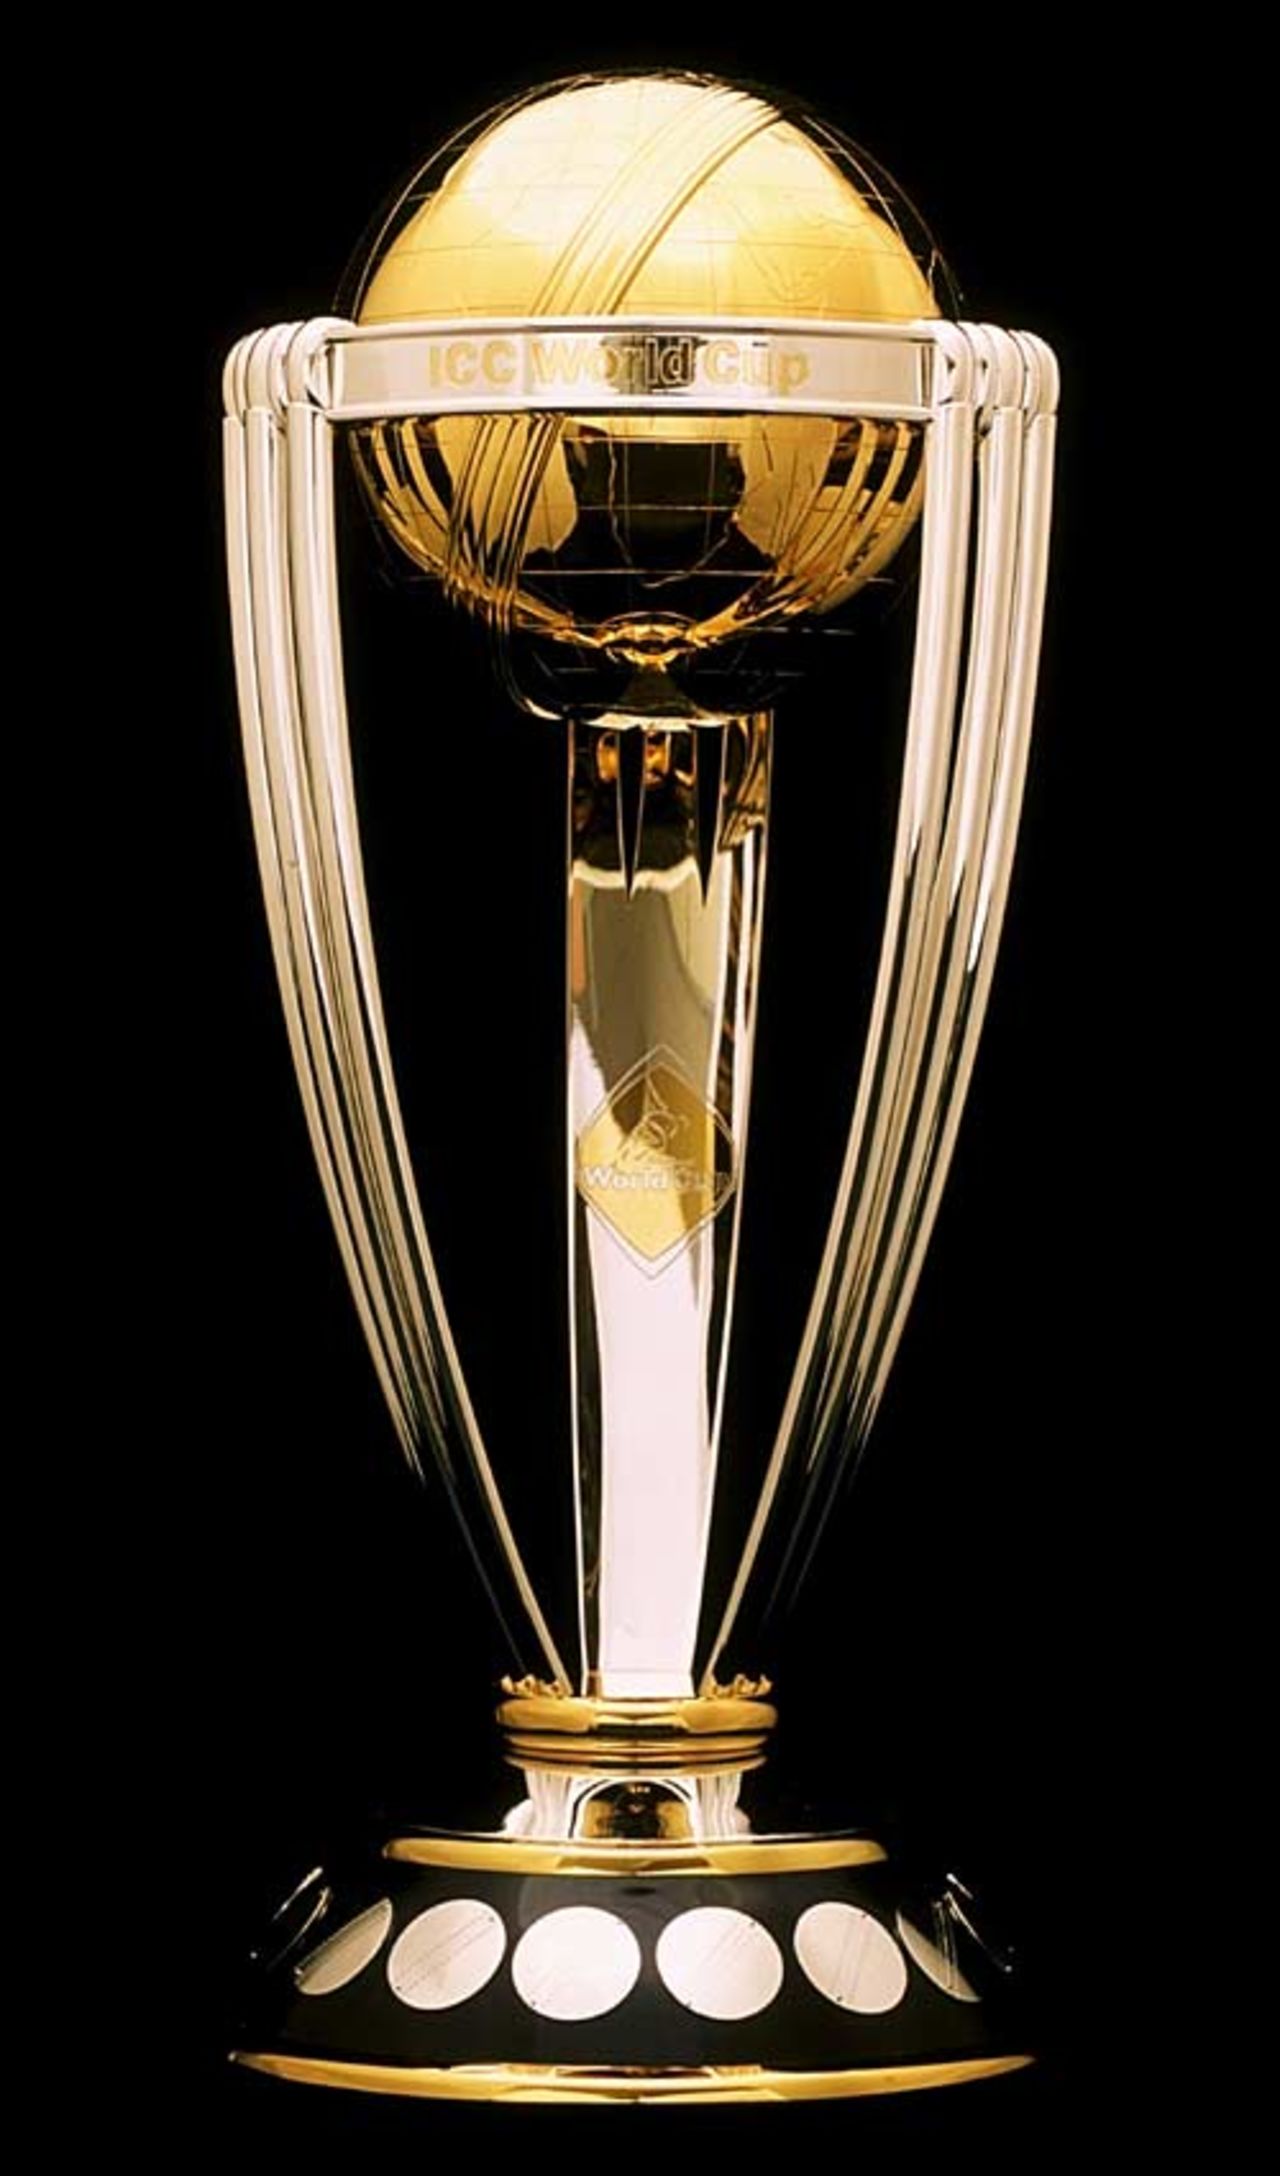 The ICC World Cup